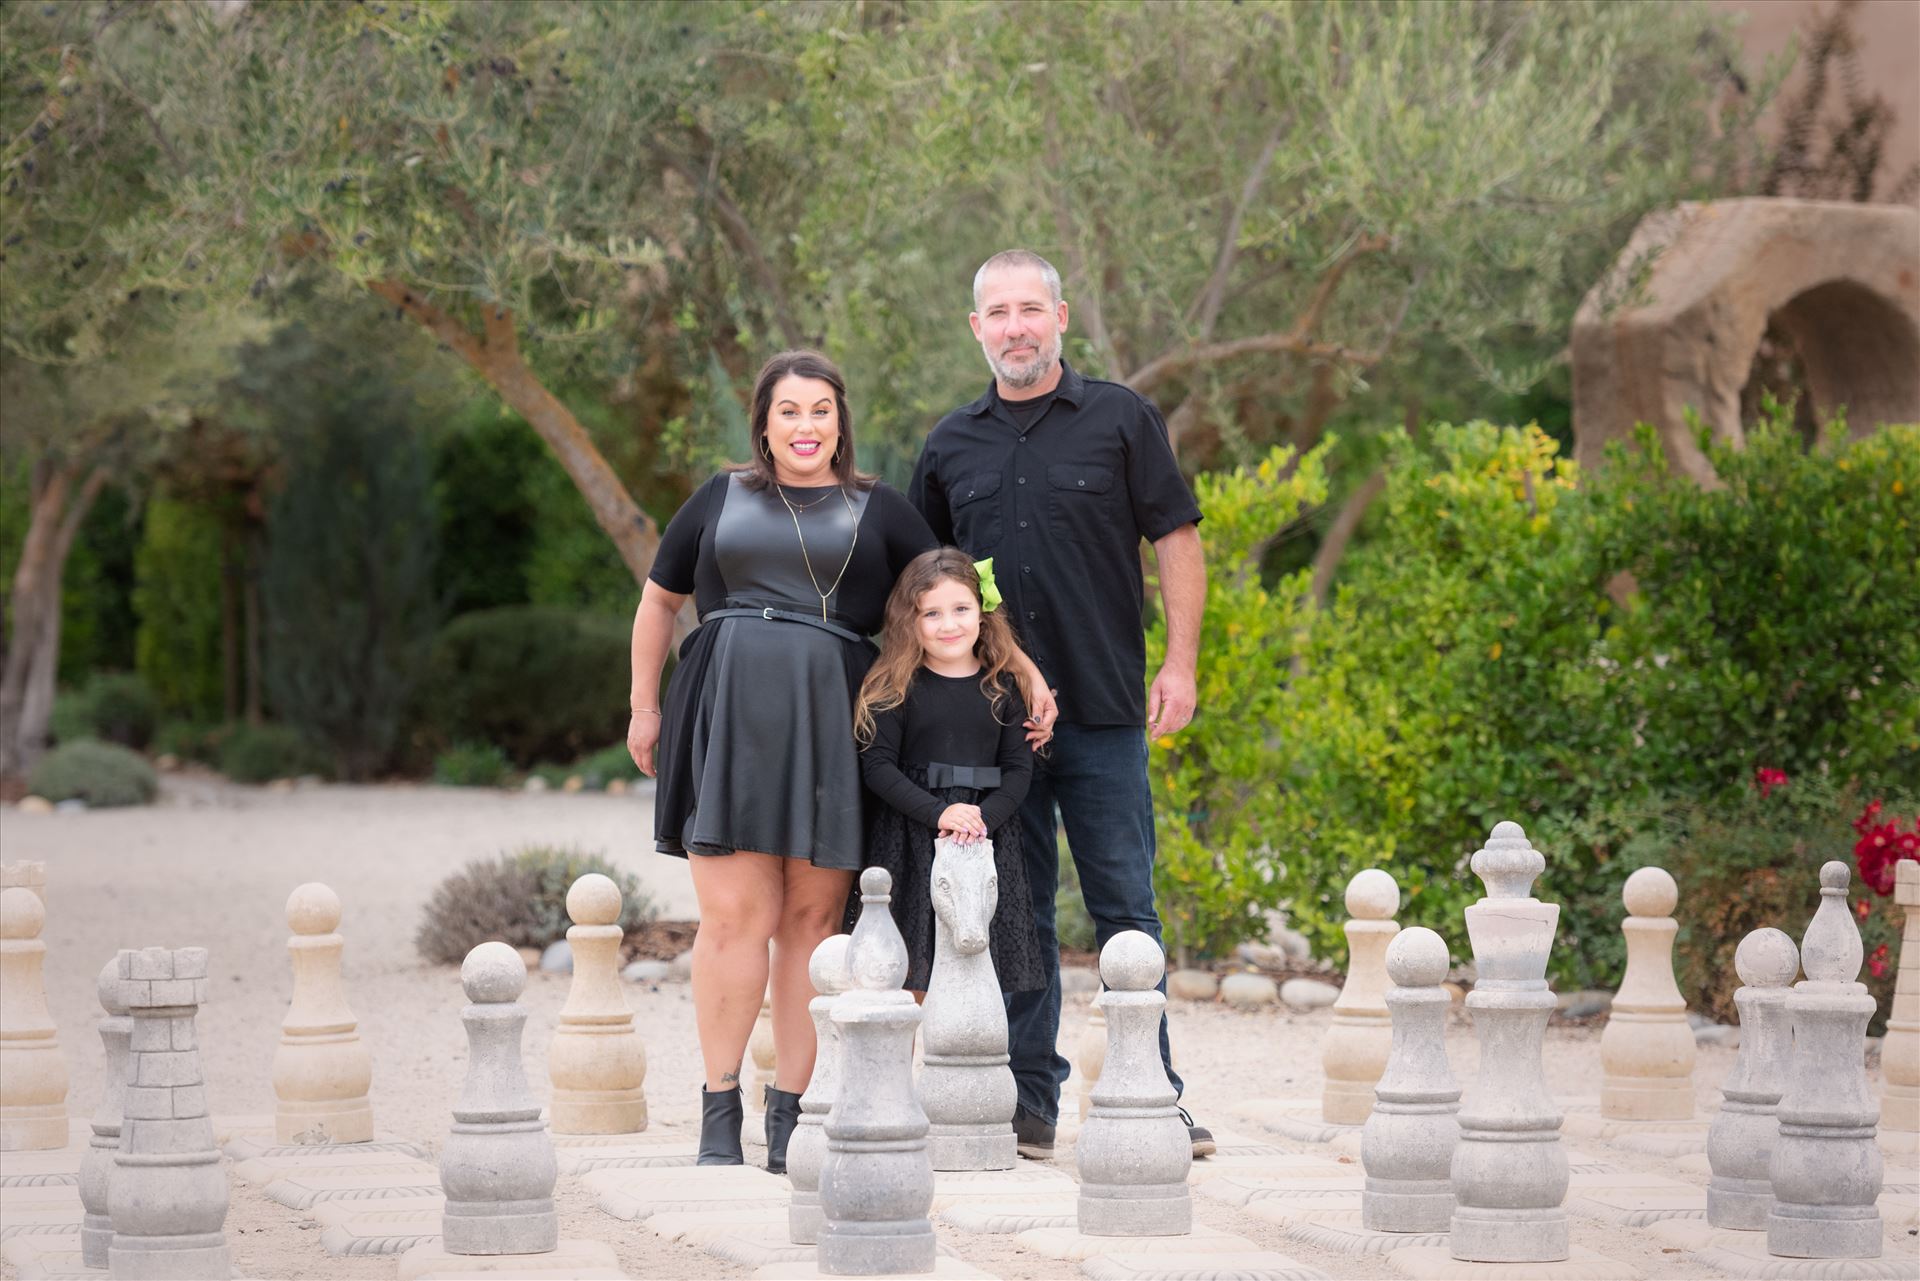 Final-8089.JPG Sarah Williams of Mirror's Edge Photography, a San Luis Obispo Wedding, Engagement and Portrait Photographer, captures the Foster Family Fall Session at the gorgeous Allegretto Resort and Vineyards in Paso Robles, California. Chess Board Family Photograph by Sarah Williams